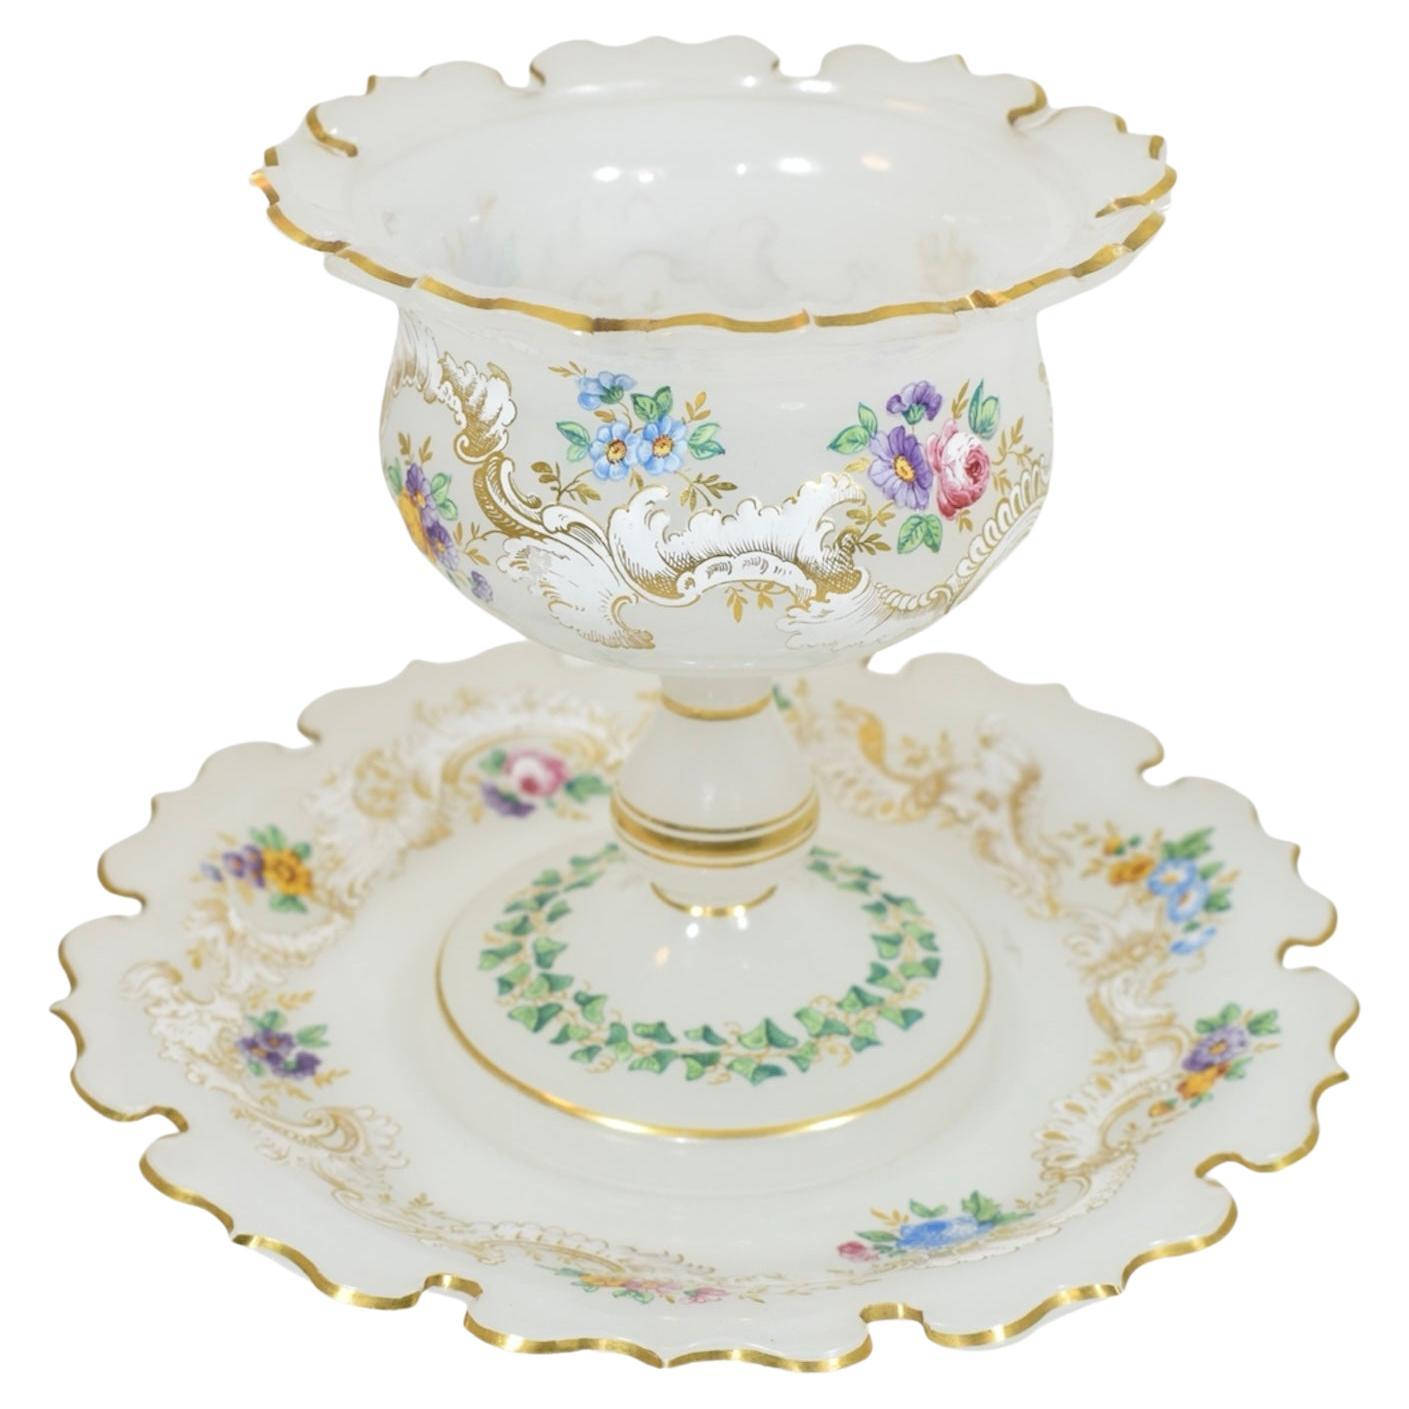 Antique Opaline Enameled Glass Tazza Bowl and Plate, 19th Century For Sale